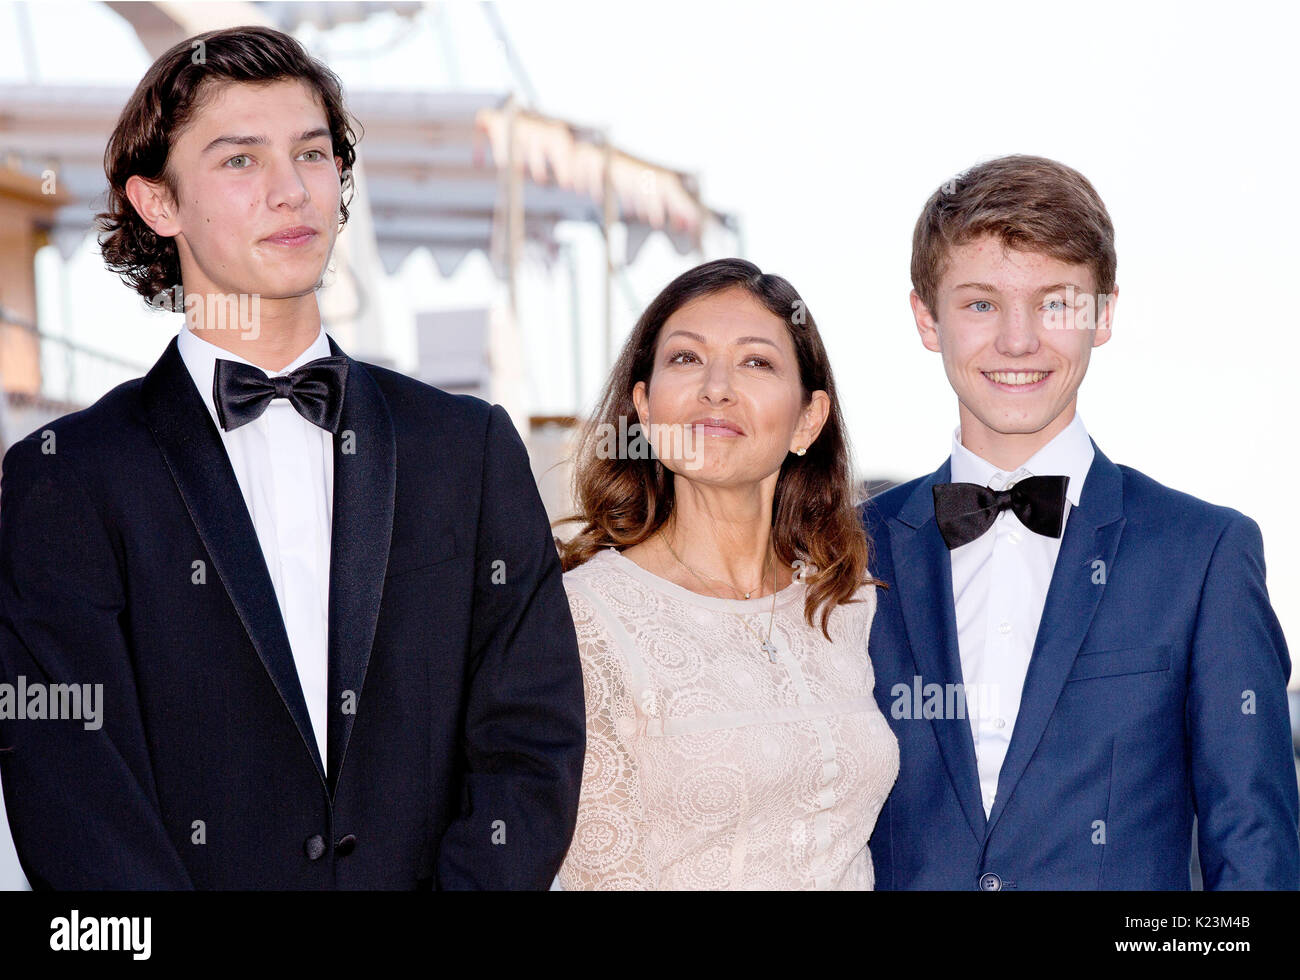 Prince Felix Of Denmark High Resolution Stock Photography and Images - Alamy